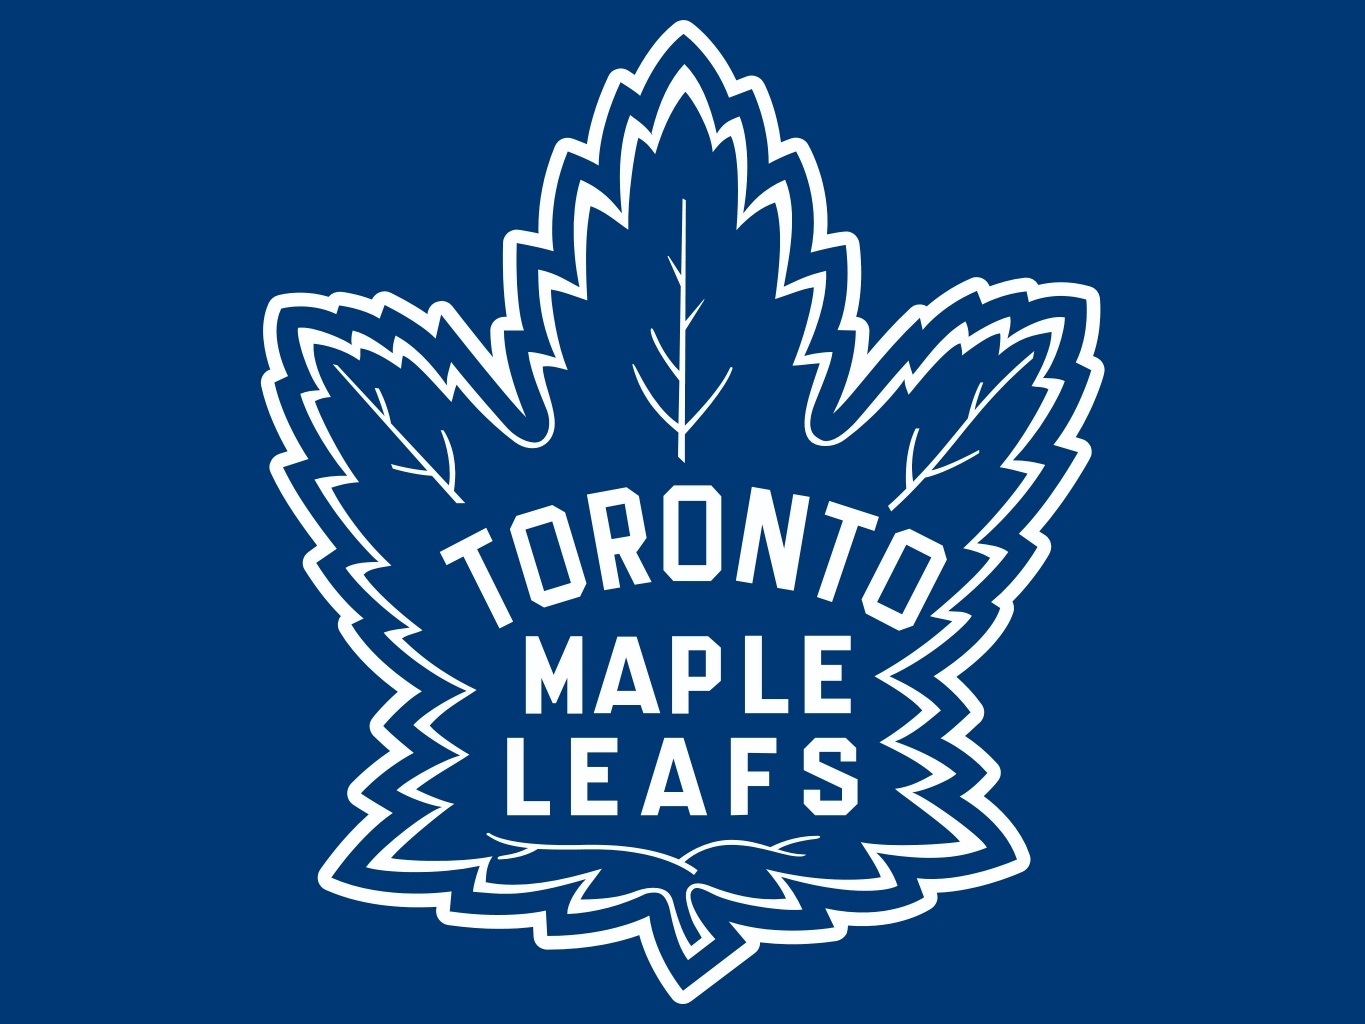 Toronto Maple Leafs Pics, Sports Collection